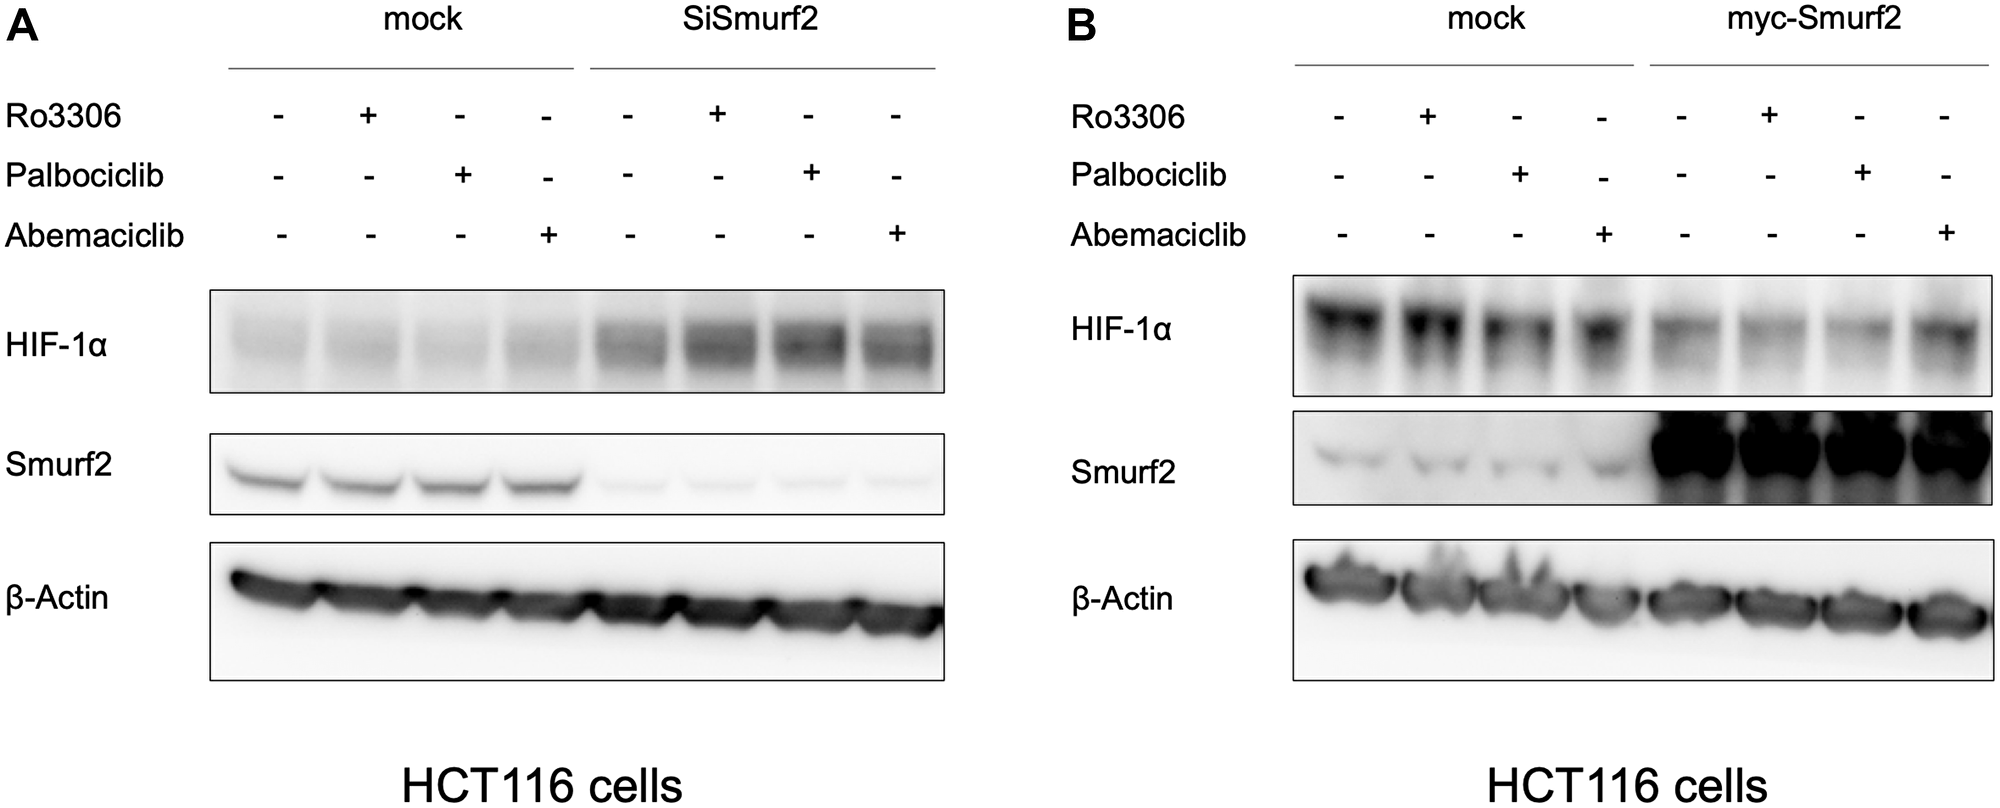 Smurf2 regulates HIF-1α expression in HCT116 colon cancer cells.